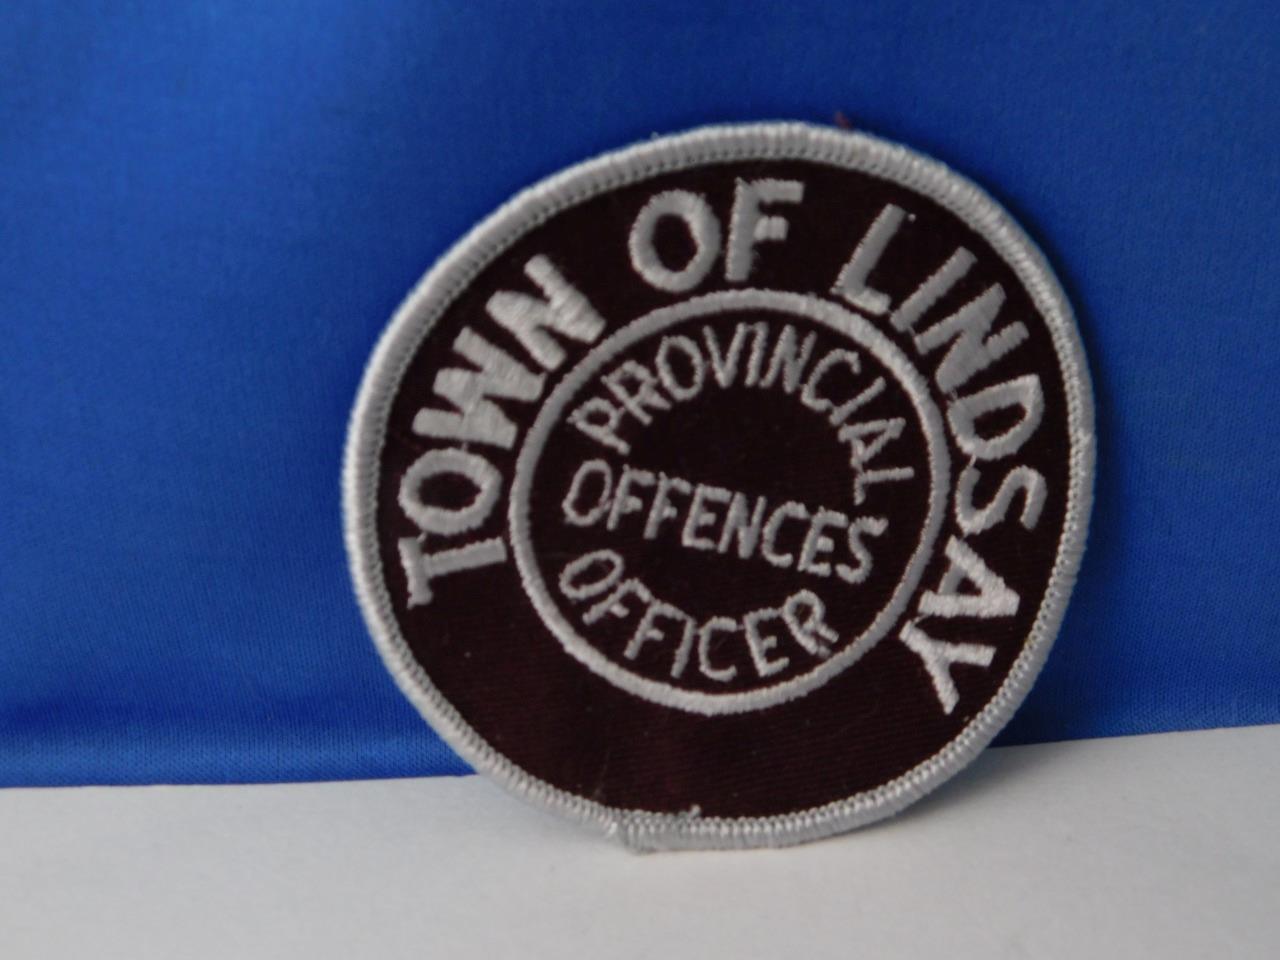 Lindsay Provincial Offences  Police Officer Vintage Patch Badge Ontario Canada